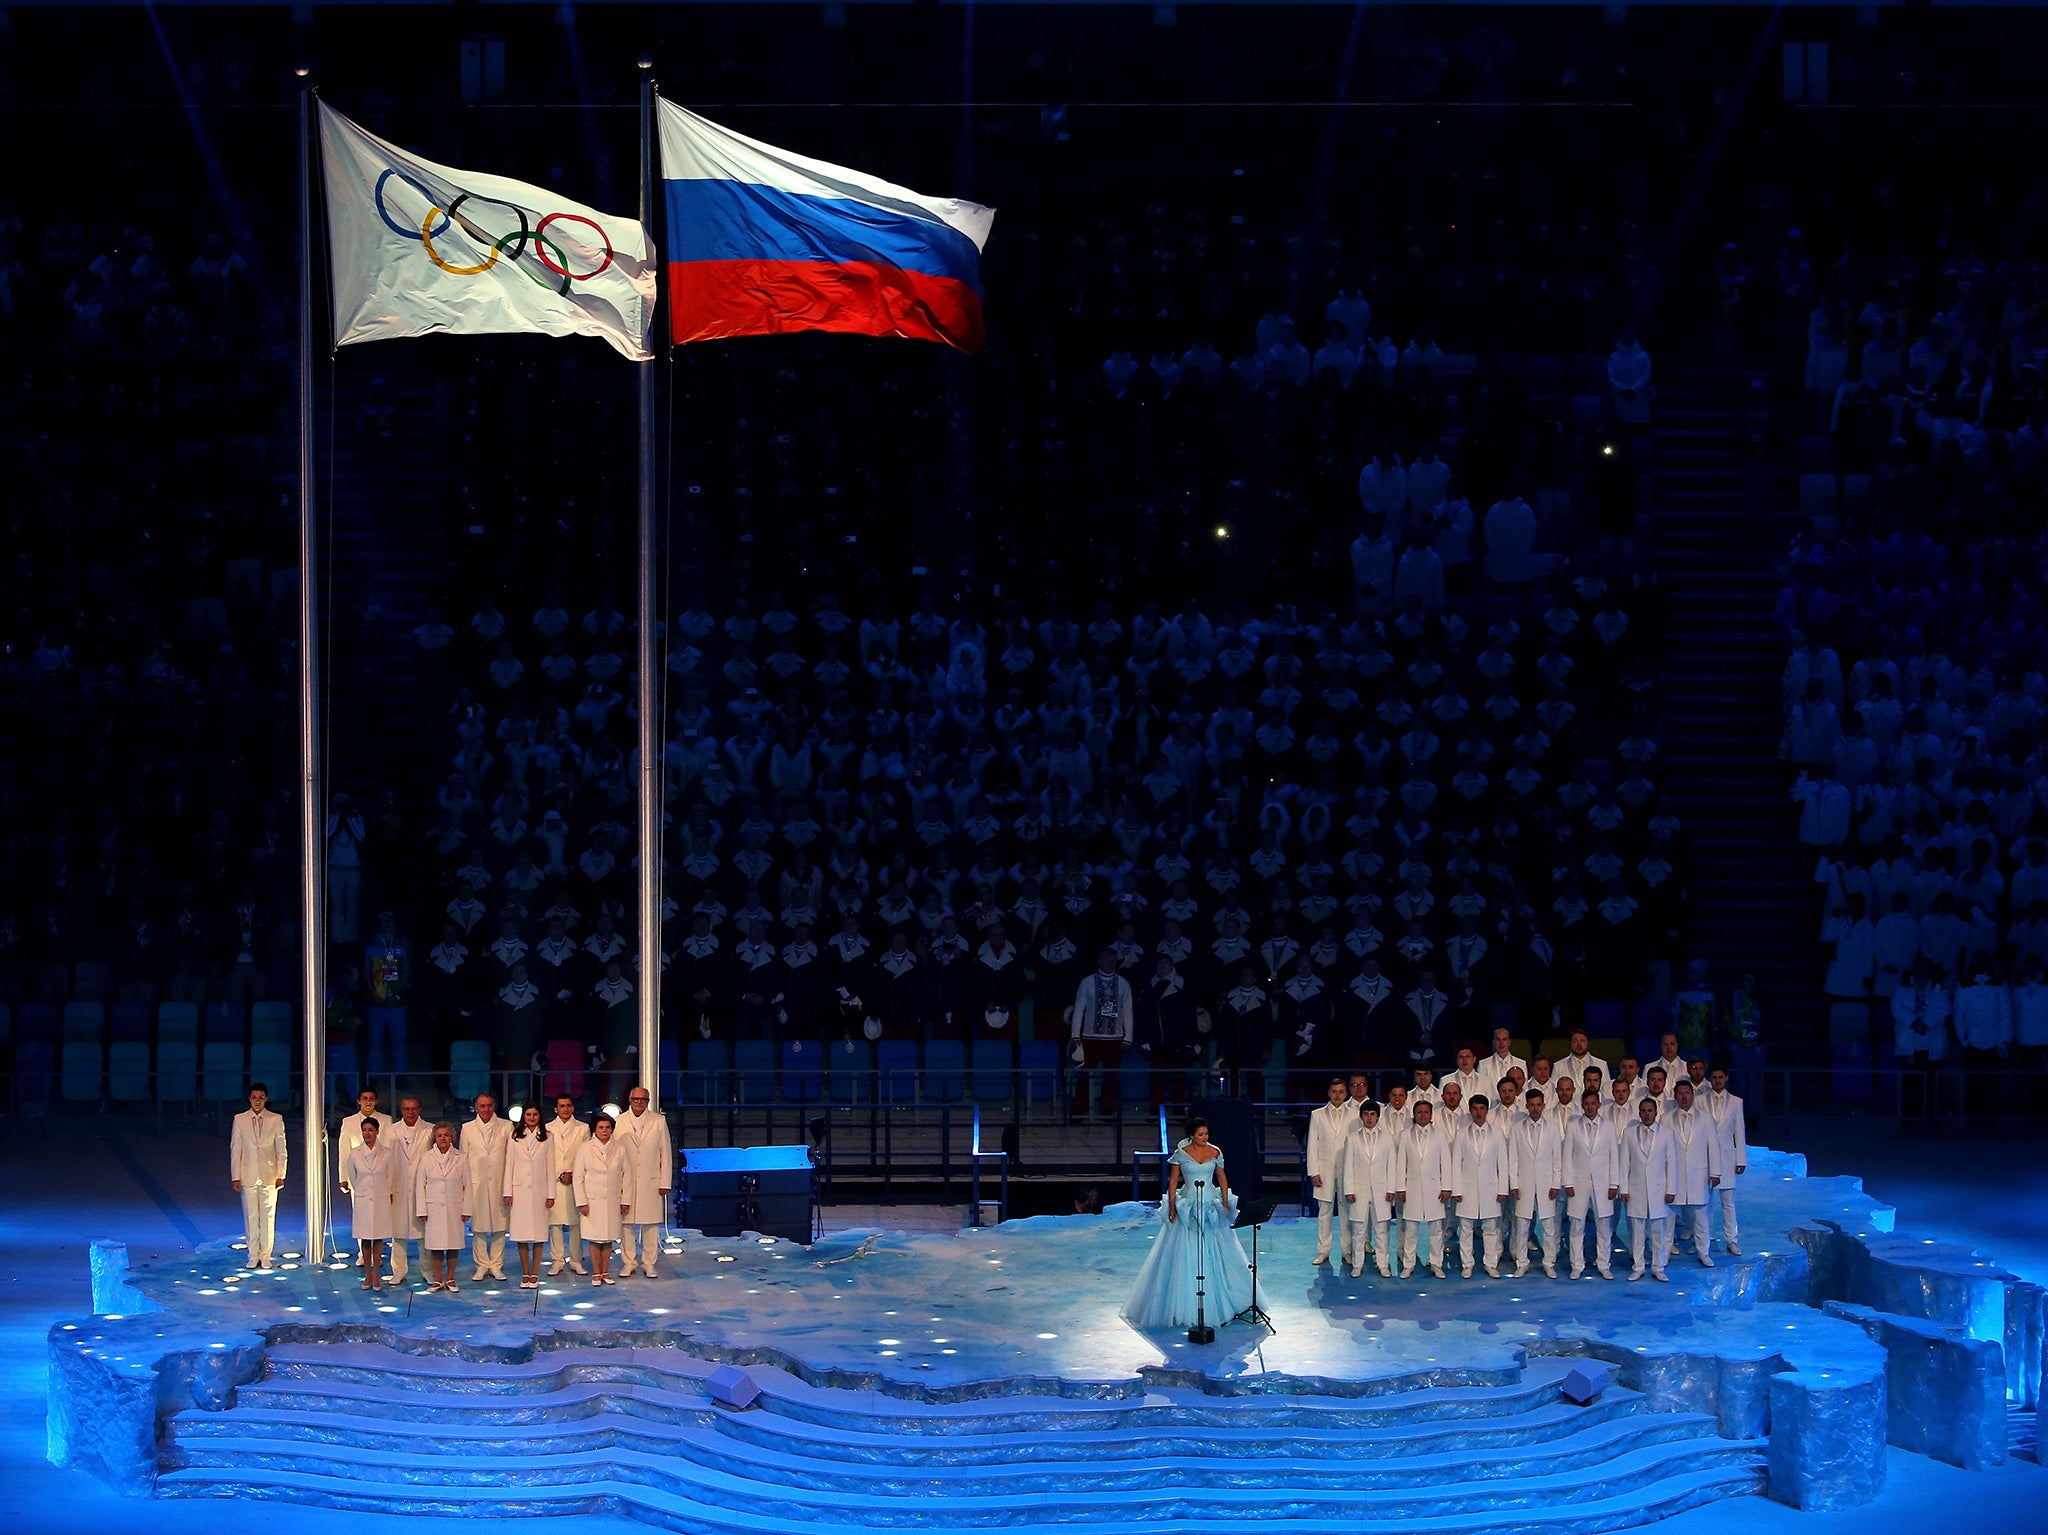 The Olympic flag is raised at the 2014 Sochi Games opening ceremony